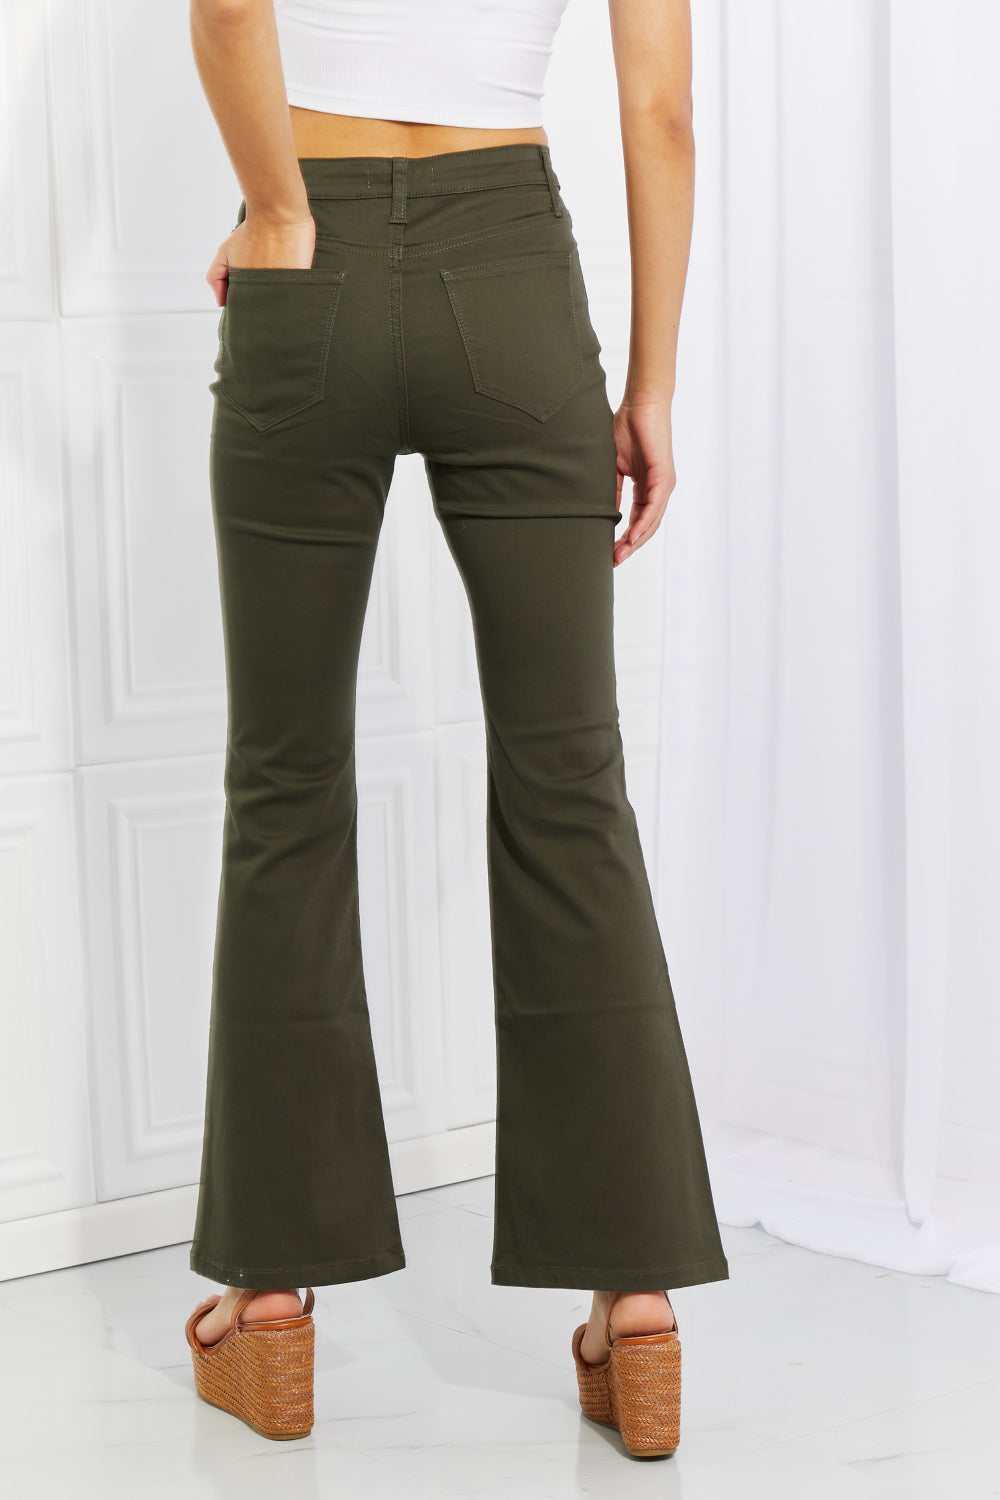 Zenana Clementine Full Size High-Rise Bootcut Pants in Dark Olive | Pants - CHANELIA